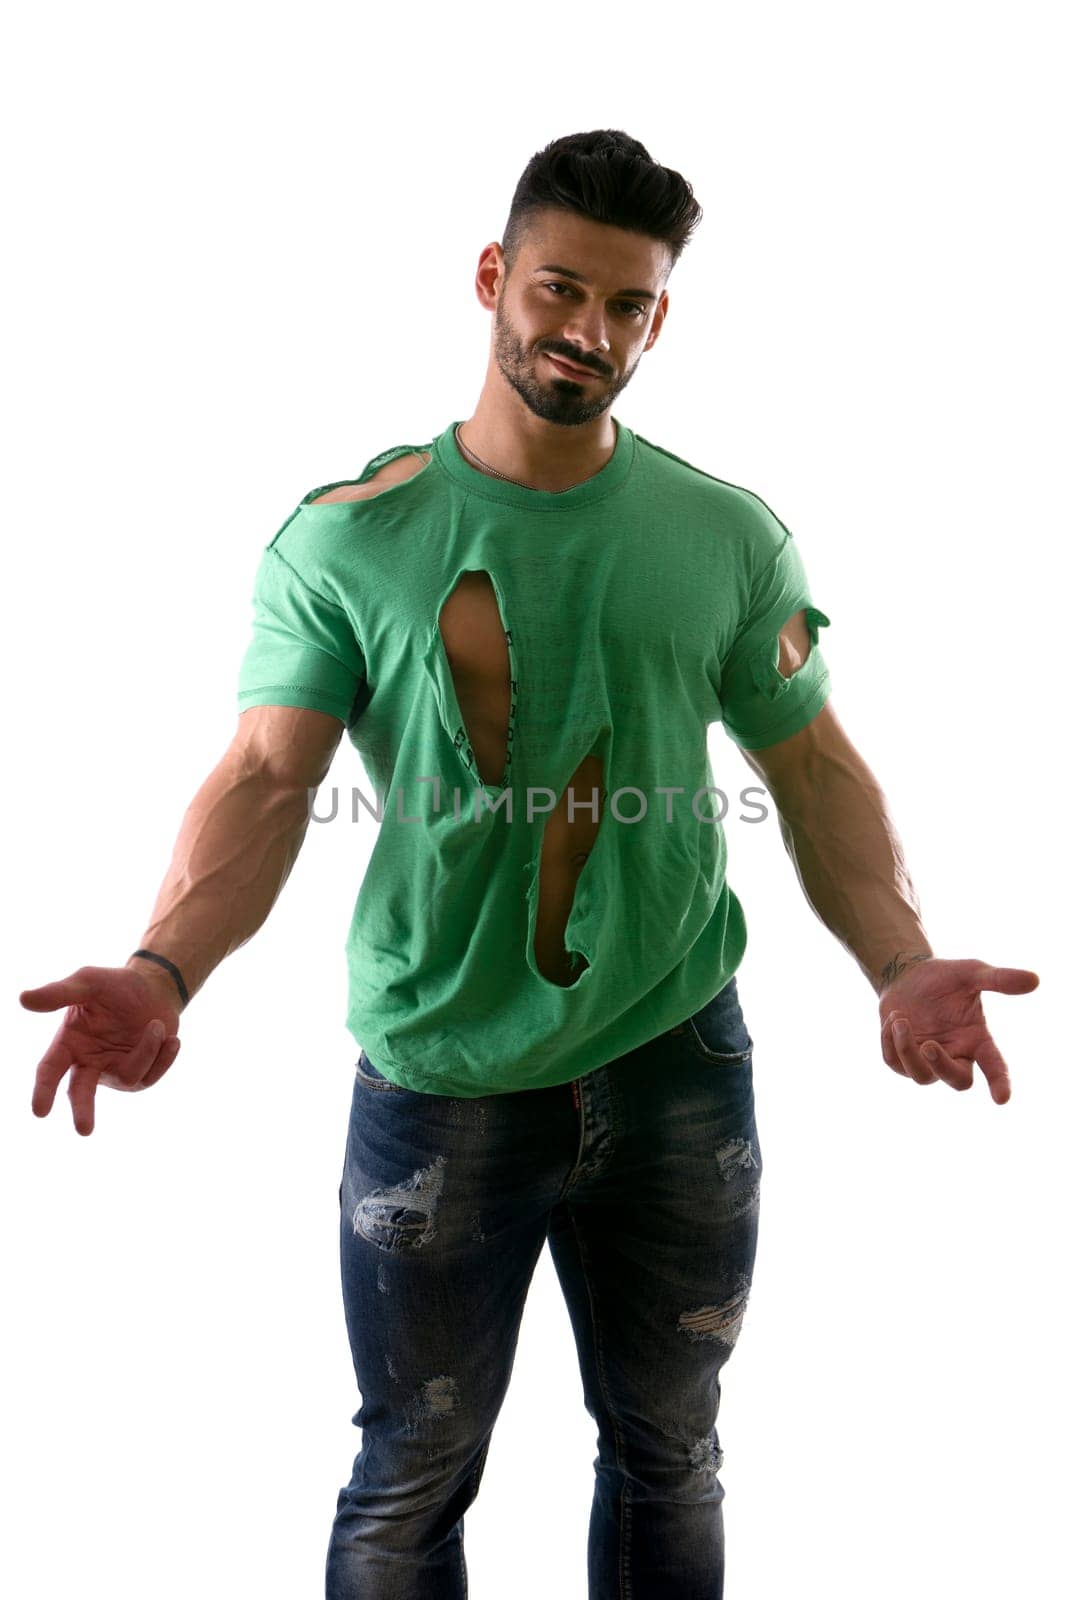 Attractive muscular strong man in ripped t shirt, isolated on white background in studio, looking at camera